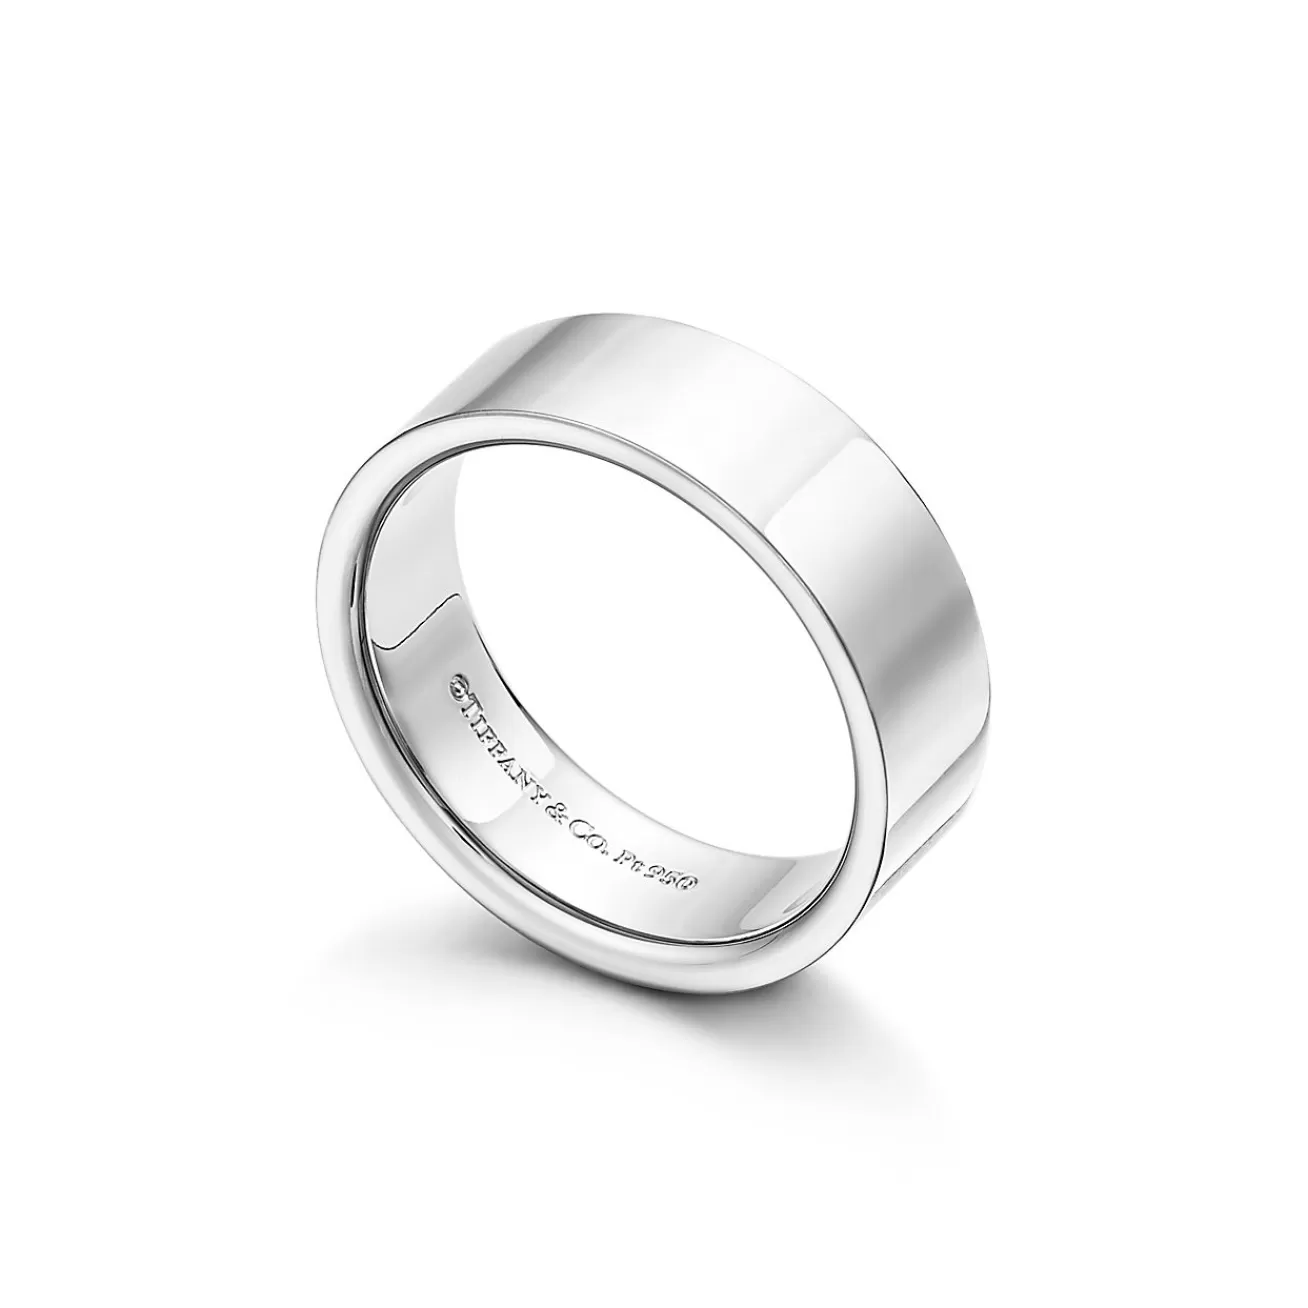 Tiffany & Co. Tiffany Essential Band ring in platinum, 6 mm wide. | ^ Rings | Men's Jewelry